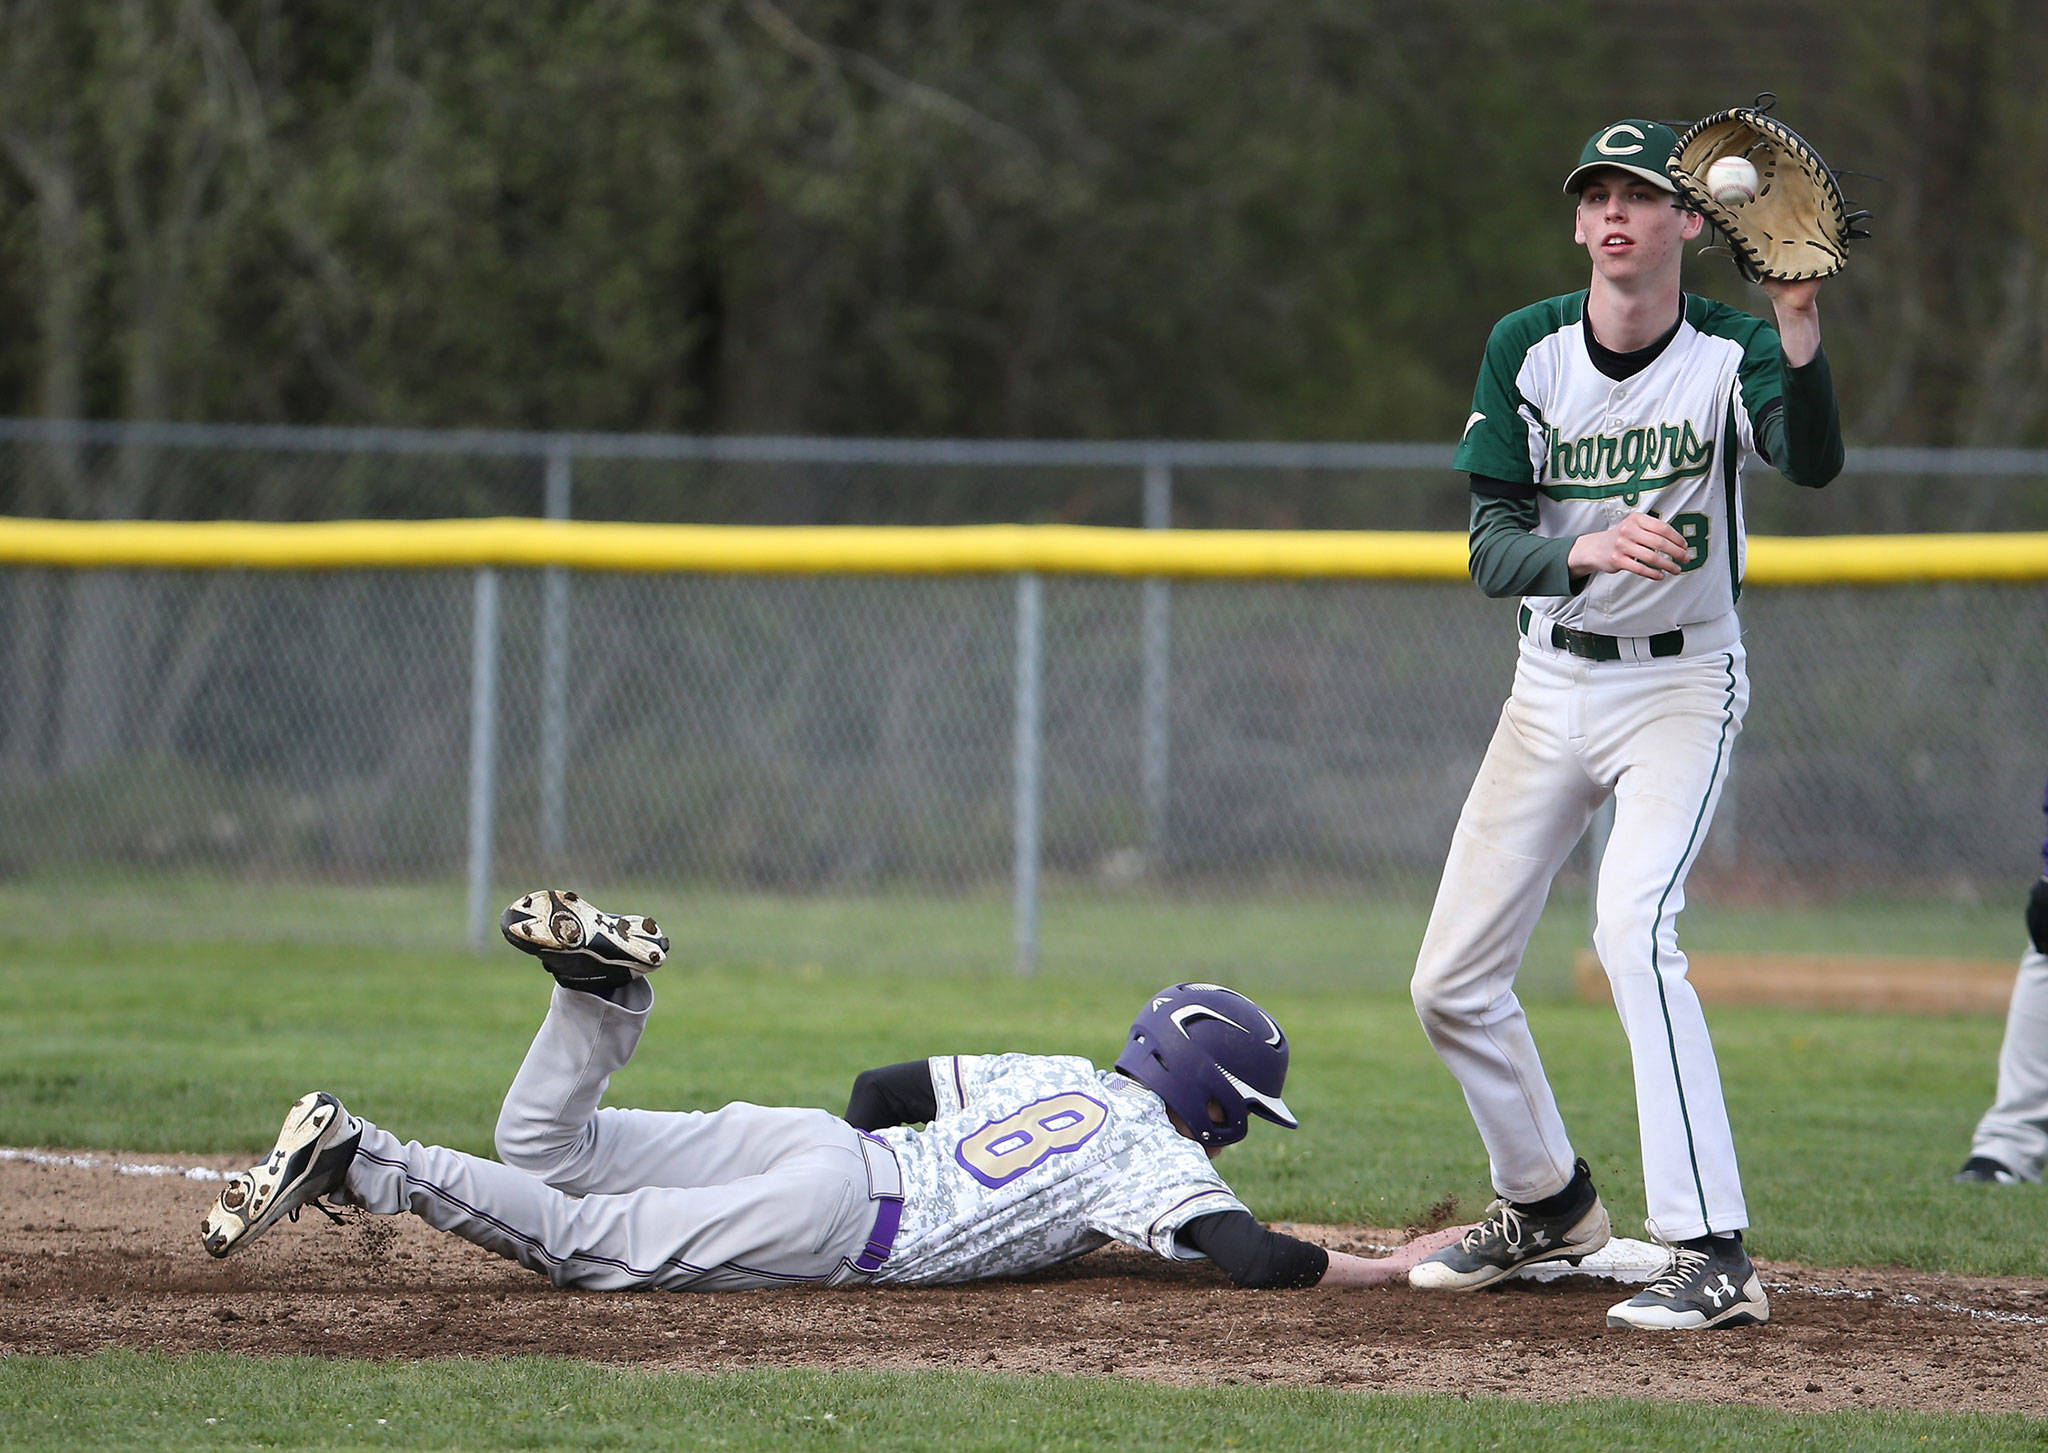 Noah Meffert slides safely back into first on a pickoff attempt as Marysville-Getchell’s Colten Bayley receives the throw.(Photo by John Fisken)